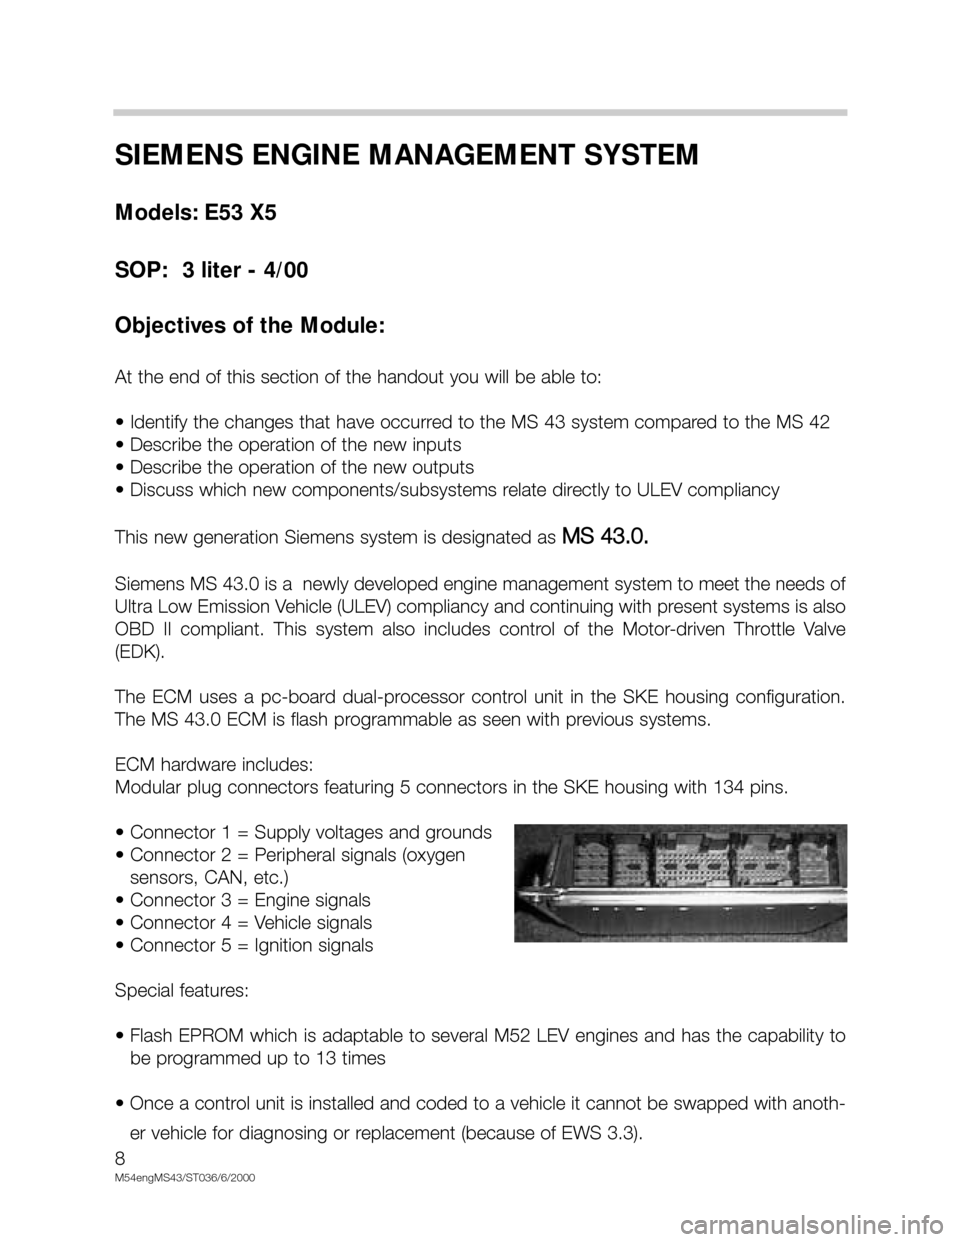 BMW X5 2000 E53 M54 Engine Workshop Manual 8
M54engMS43/ST036/6/2000
SIEMENS ENGINE MANAGEMENT SYSTEM
Models: E53 X5
SOP:  3 liter - 4/00
Objectives of the Module:
At the end of this section of the handout you will be able to:
• Identify the